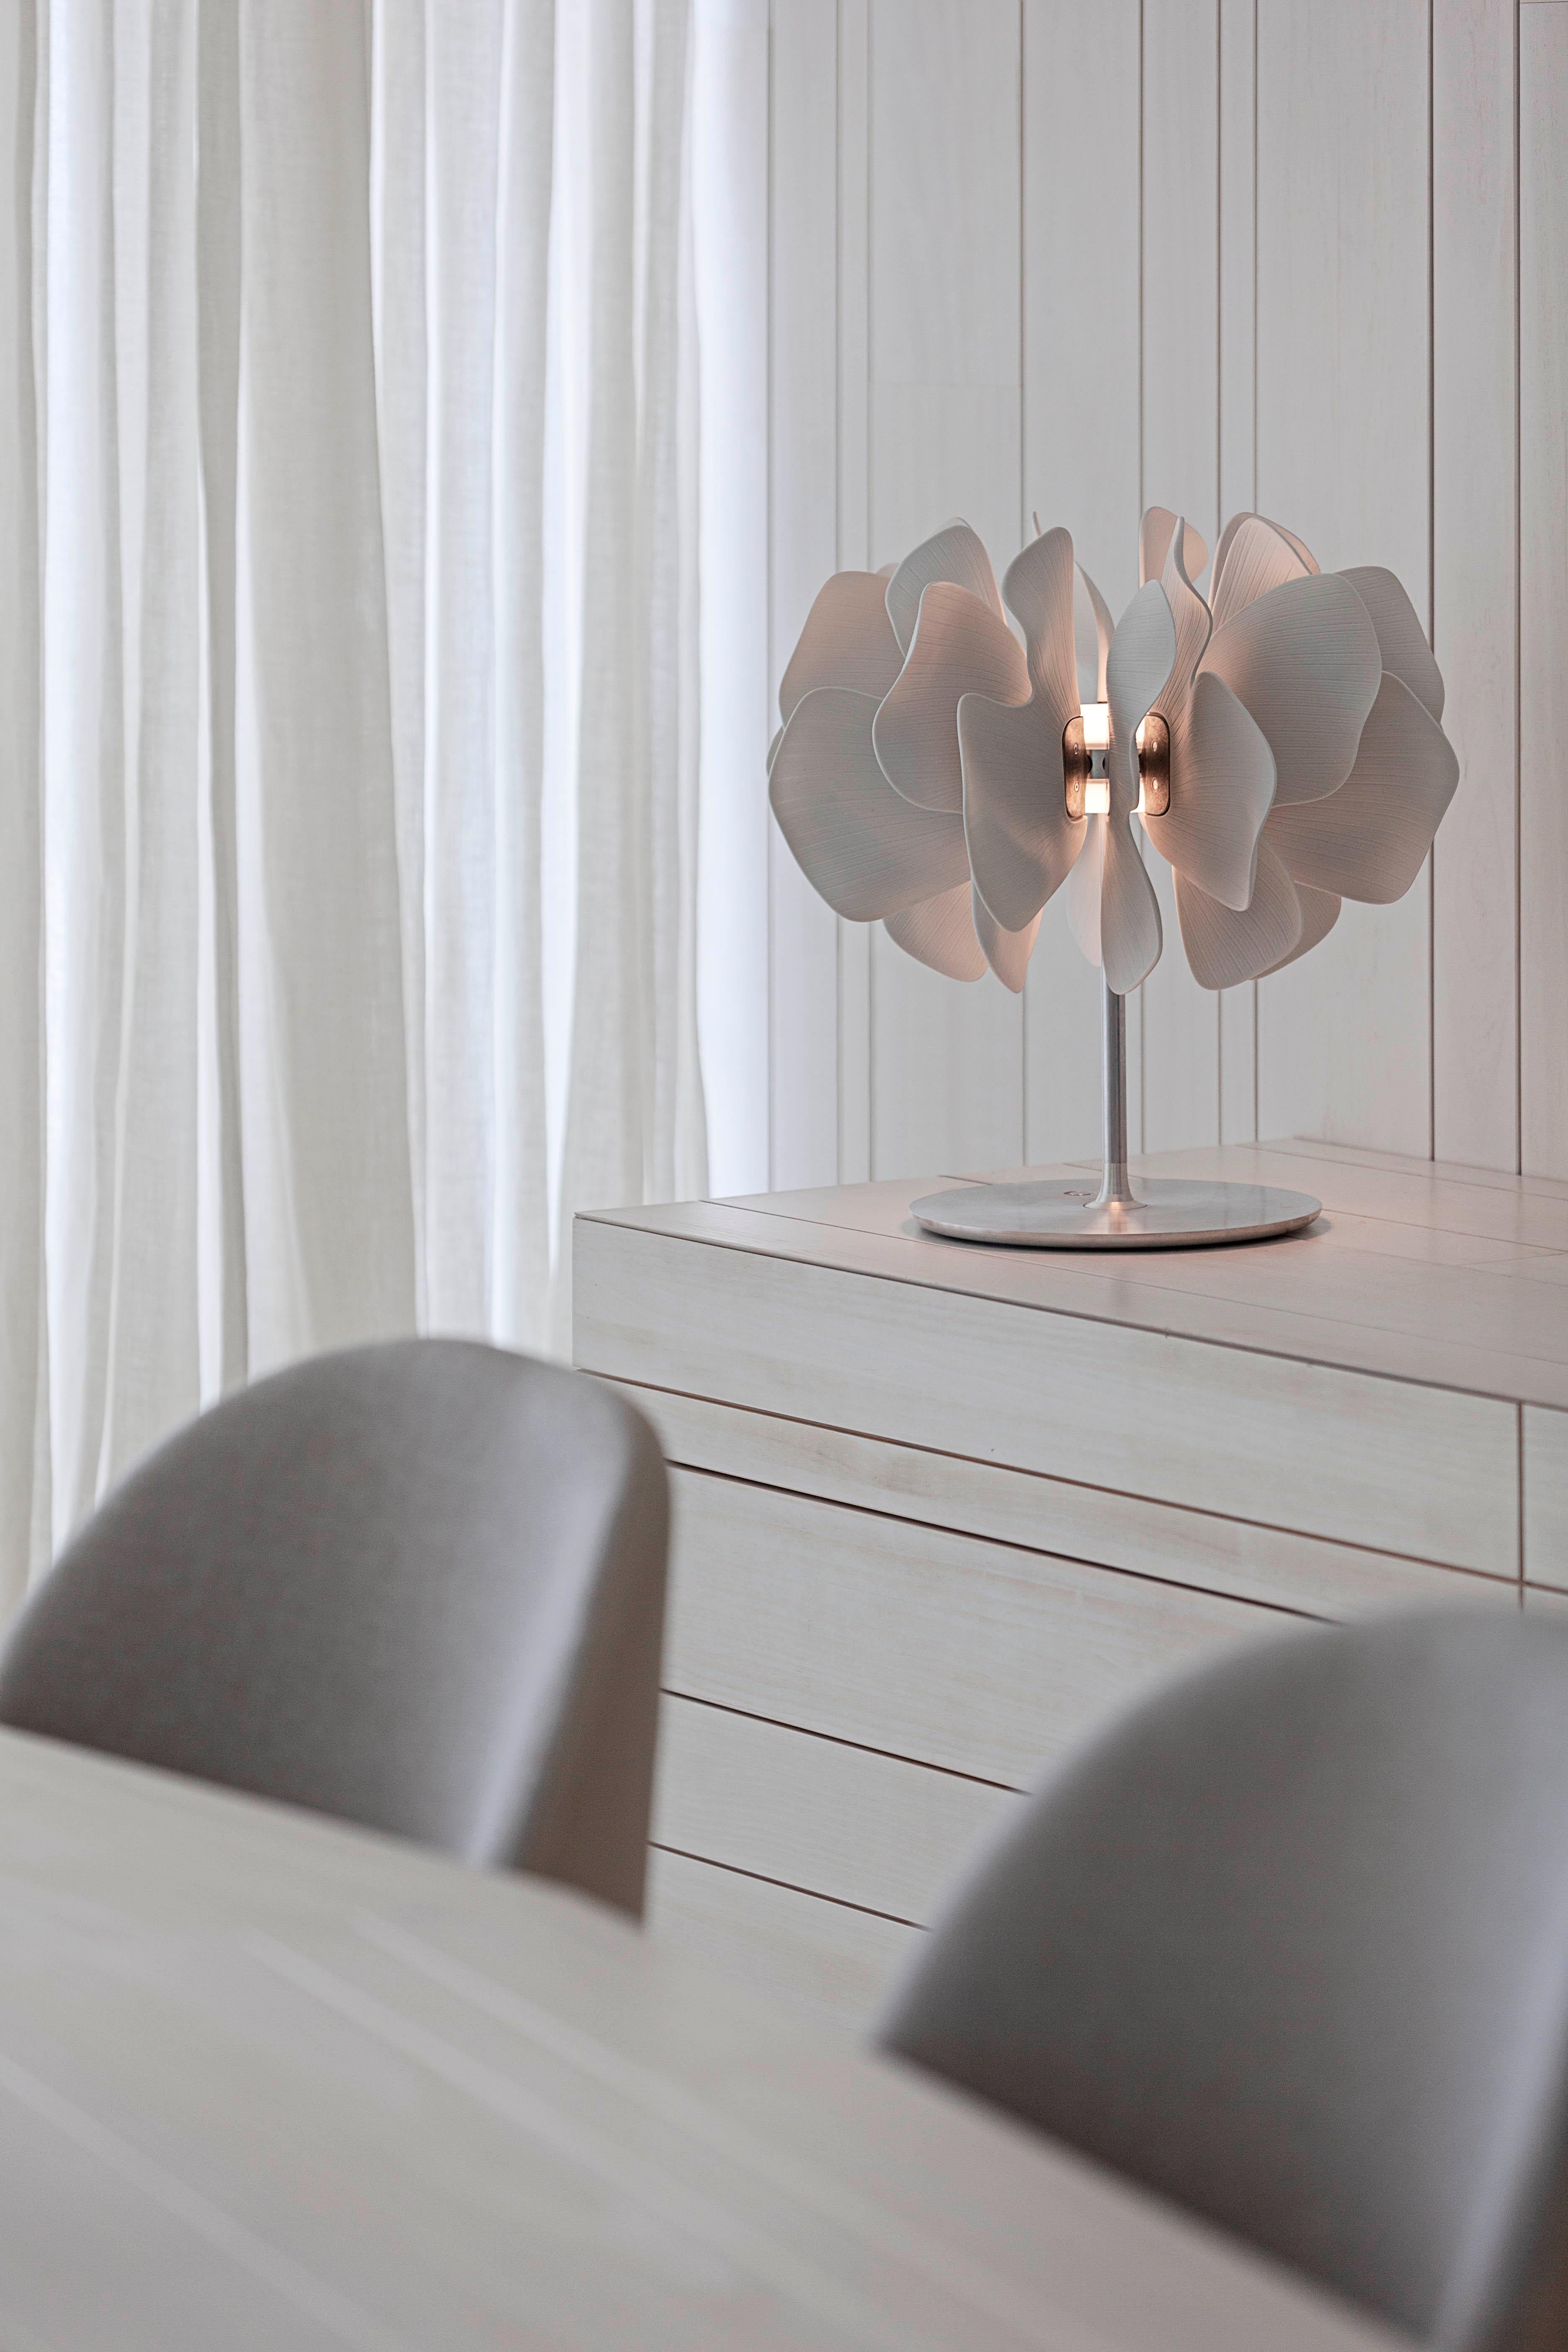 Porcelain table lamp with a spectacular design inspired by the petals of a flower delicately swaying in the breeze. This work is part of the lighting collection created by Marcel Wanders in partnership with Lladró. A novel, contemporary design that